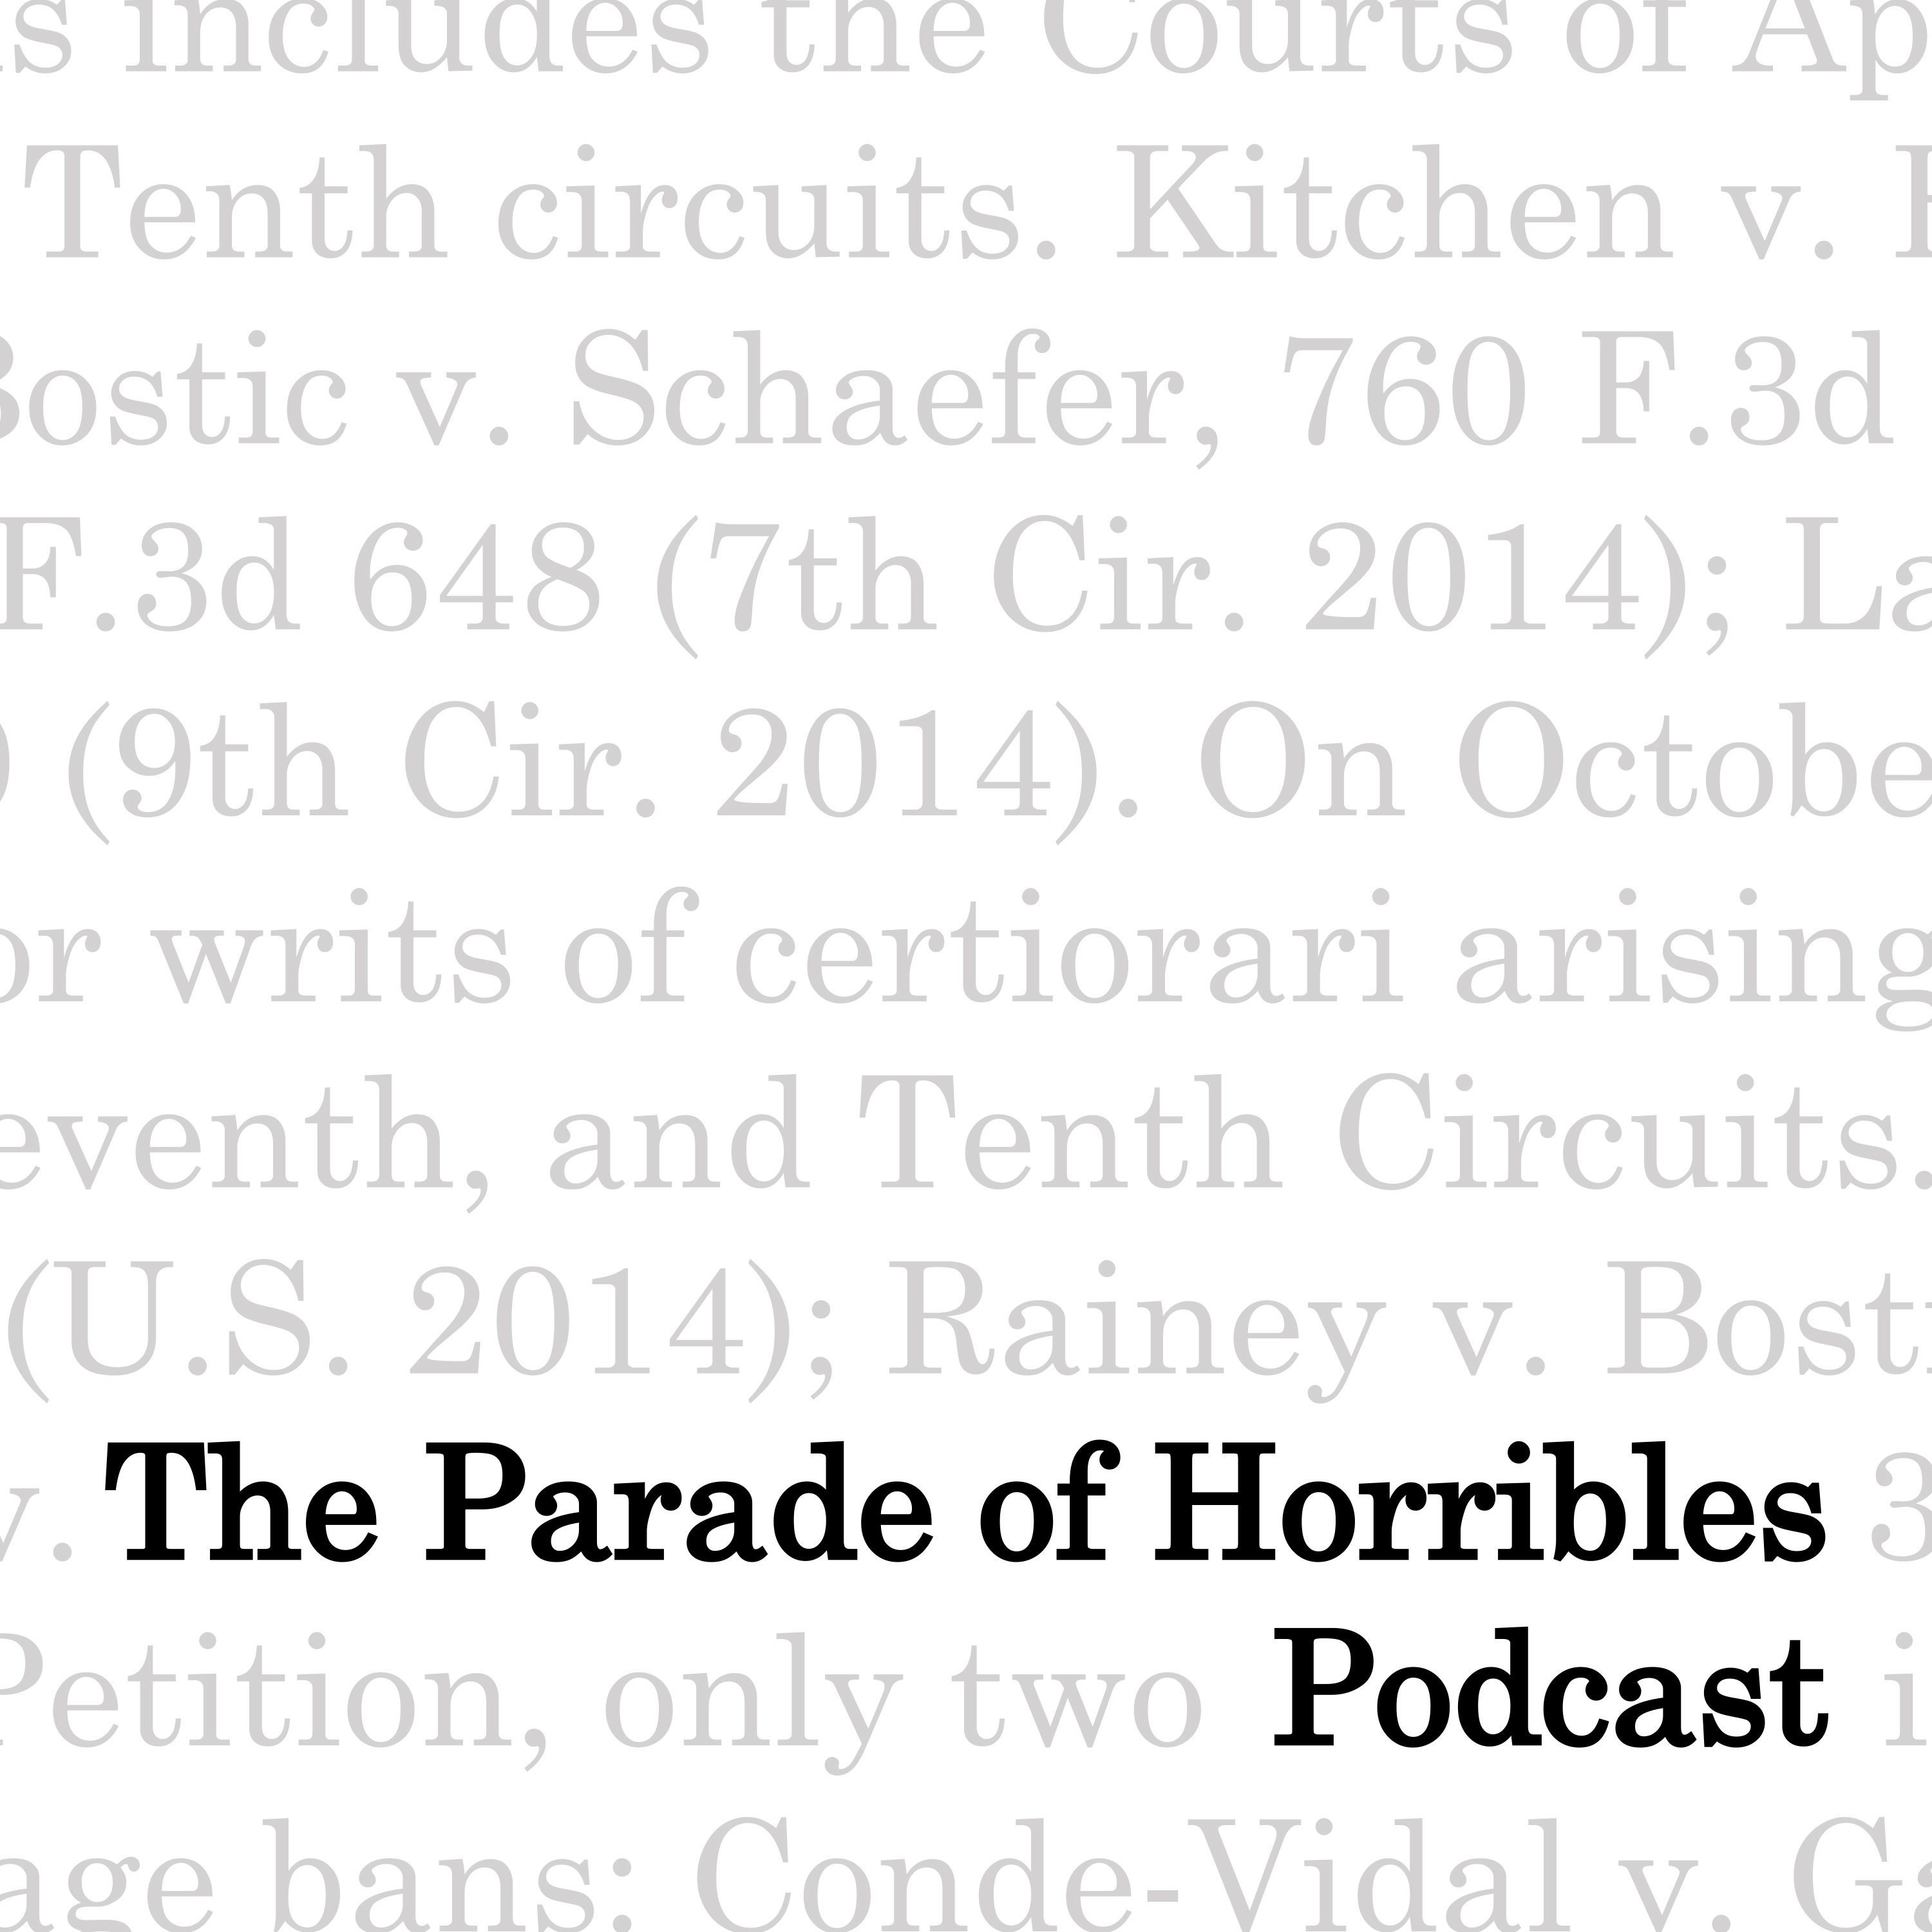 The Parade of Horribles Podcast